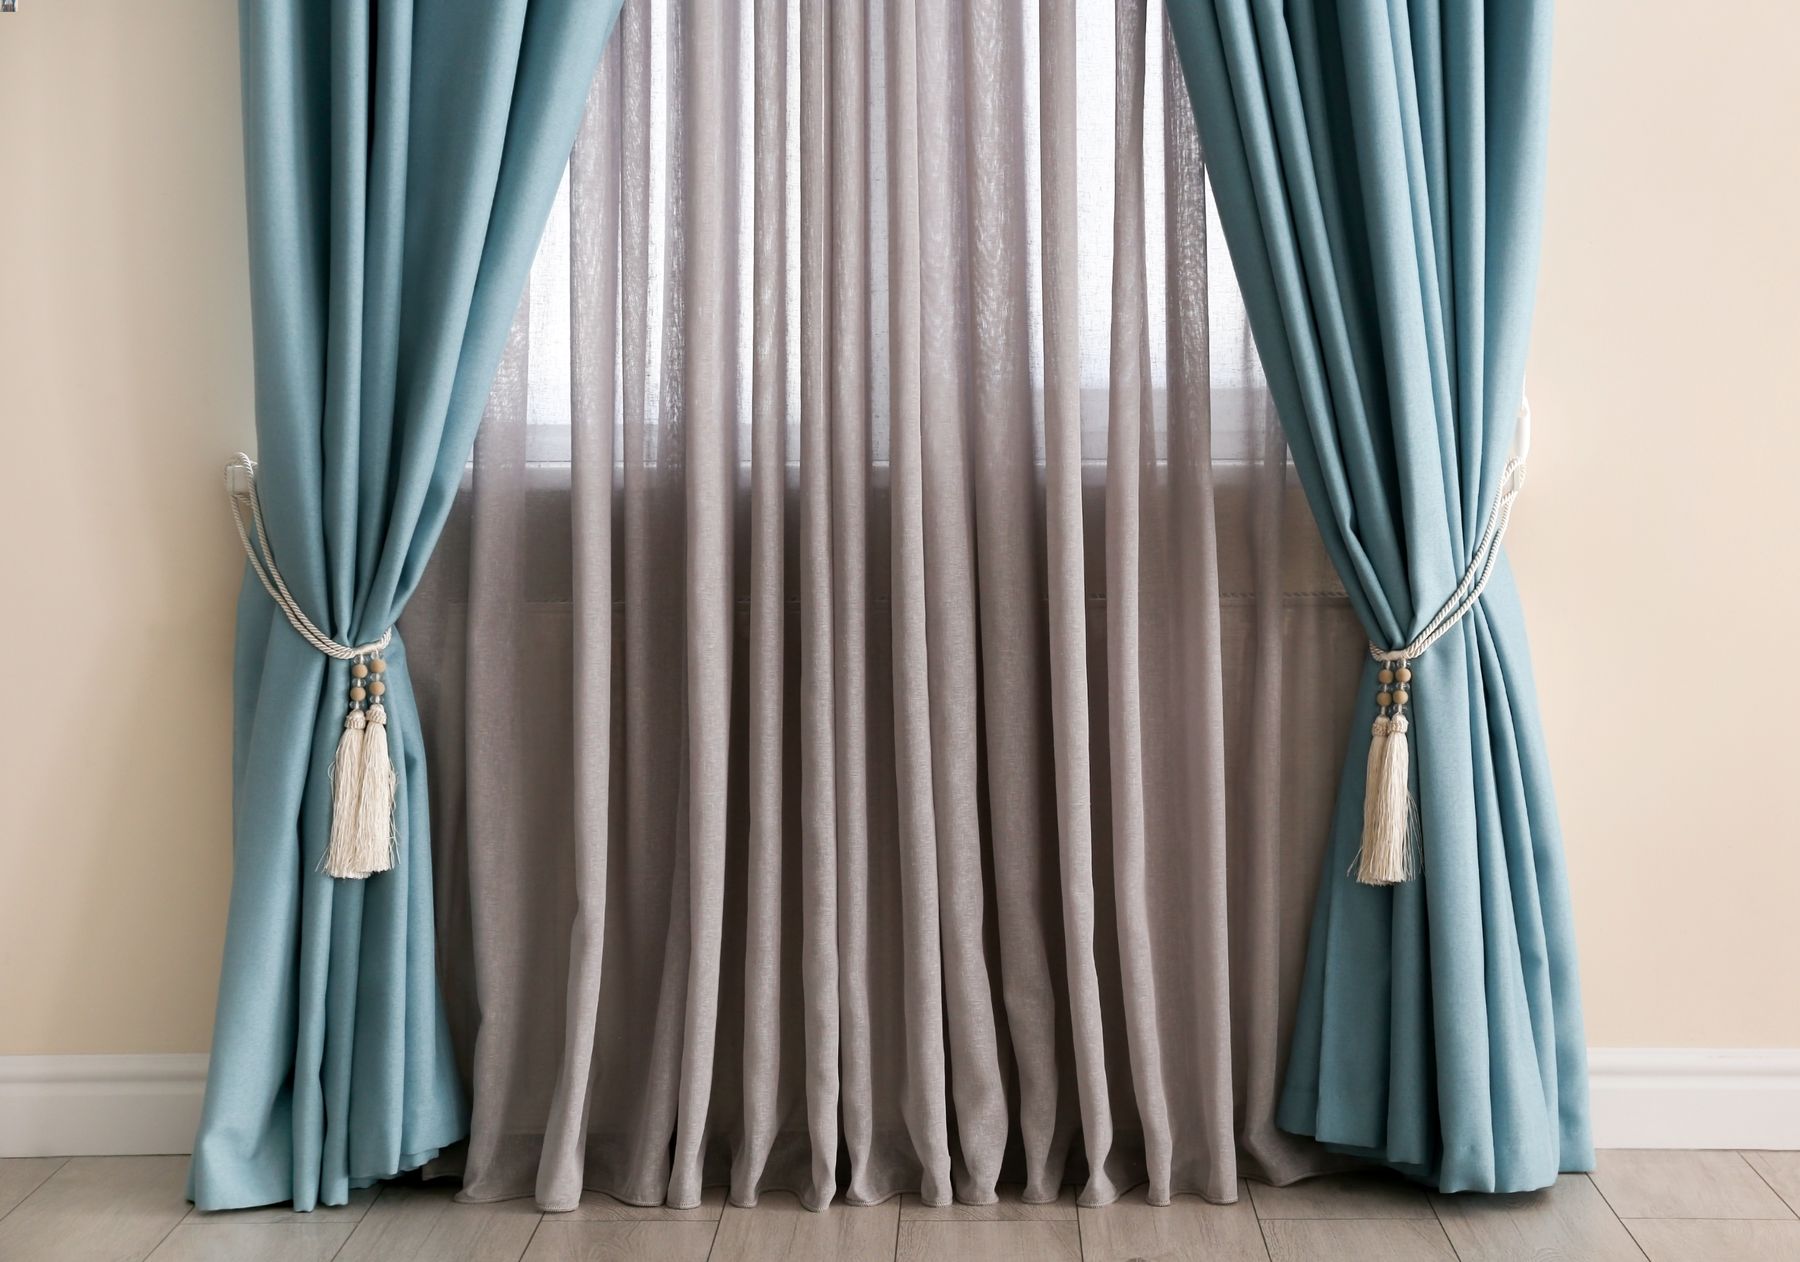 Dry Cleaning Curtains: When to Clean, What to Expect and Care Tips